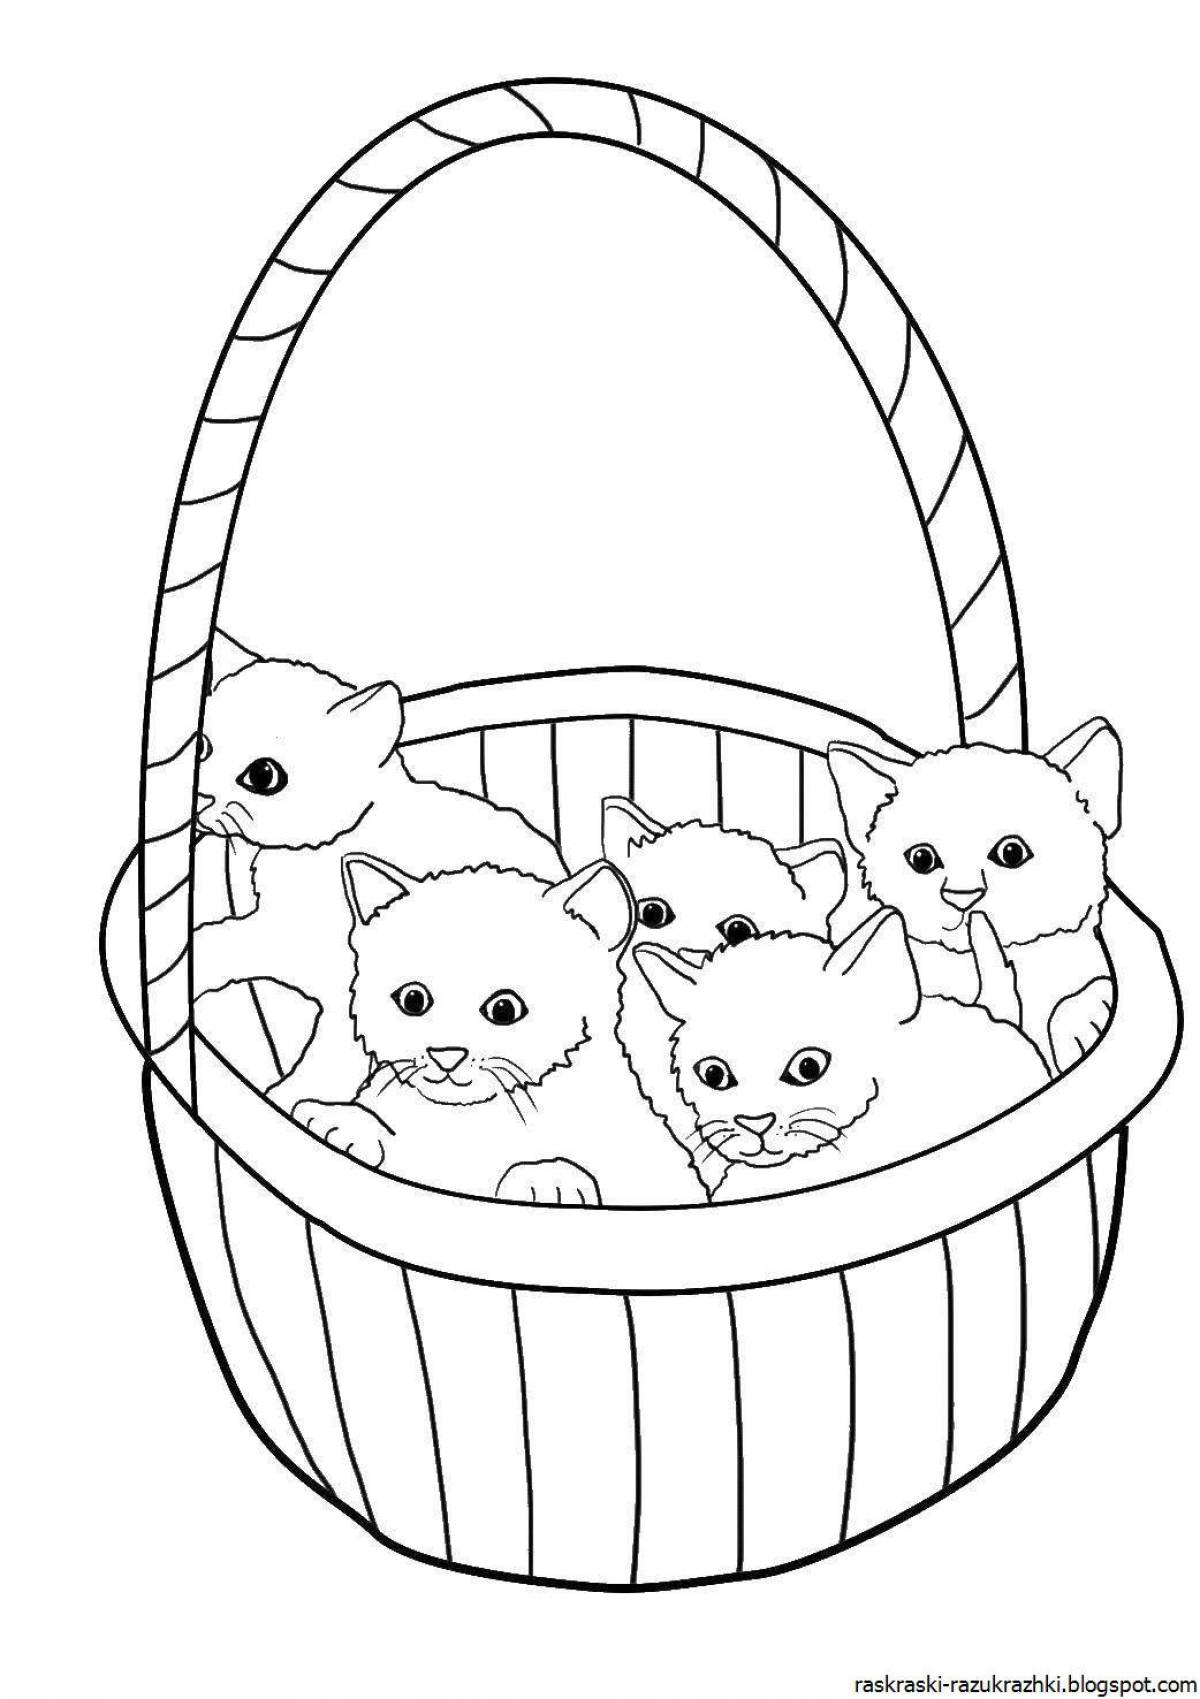 Amazing coloring pages for kitten girls